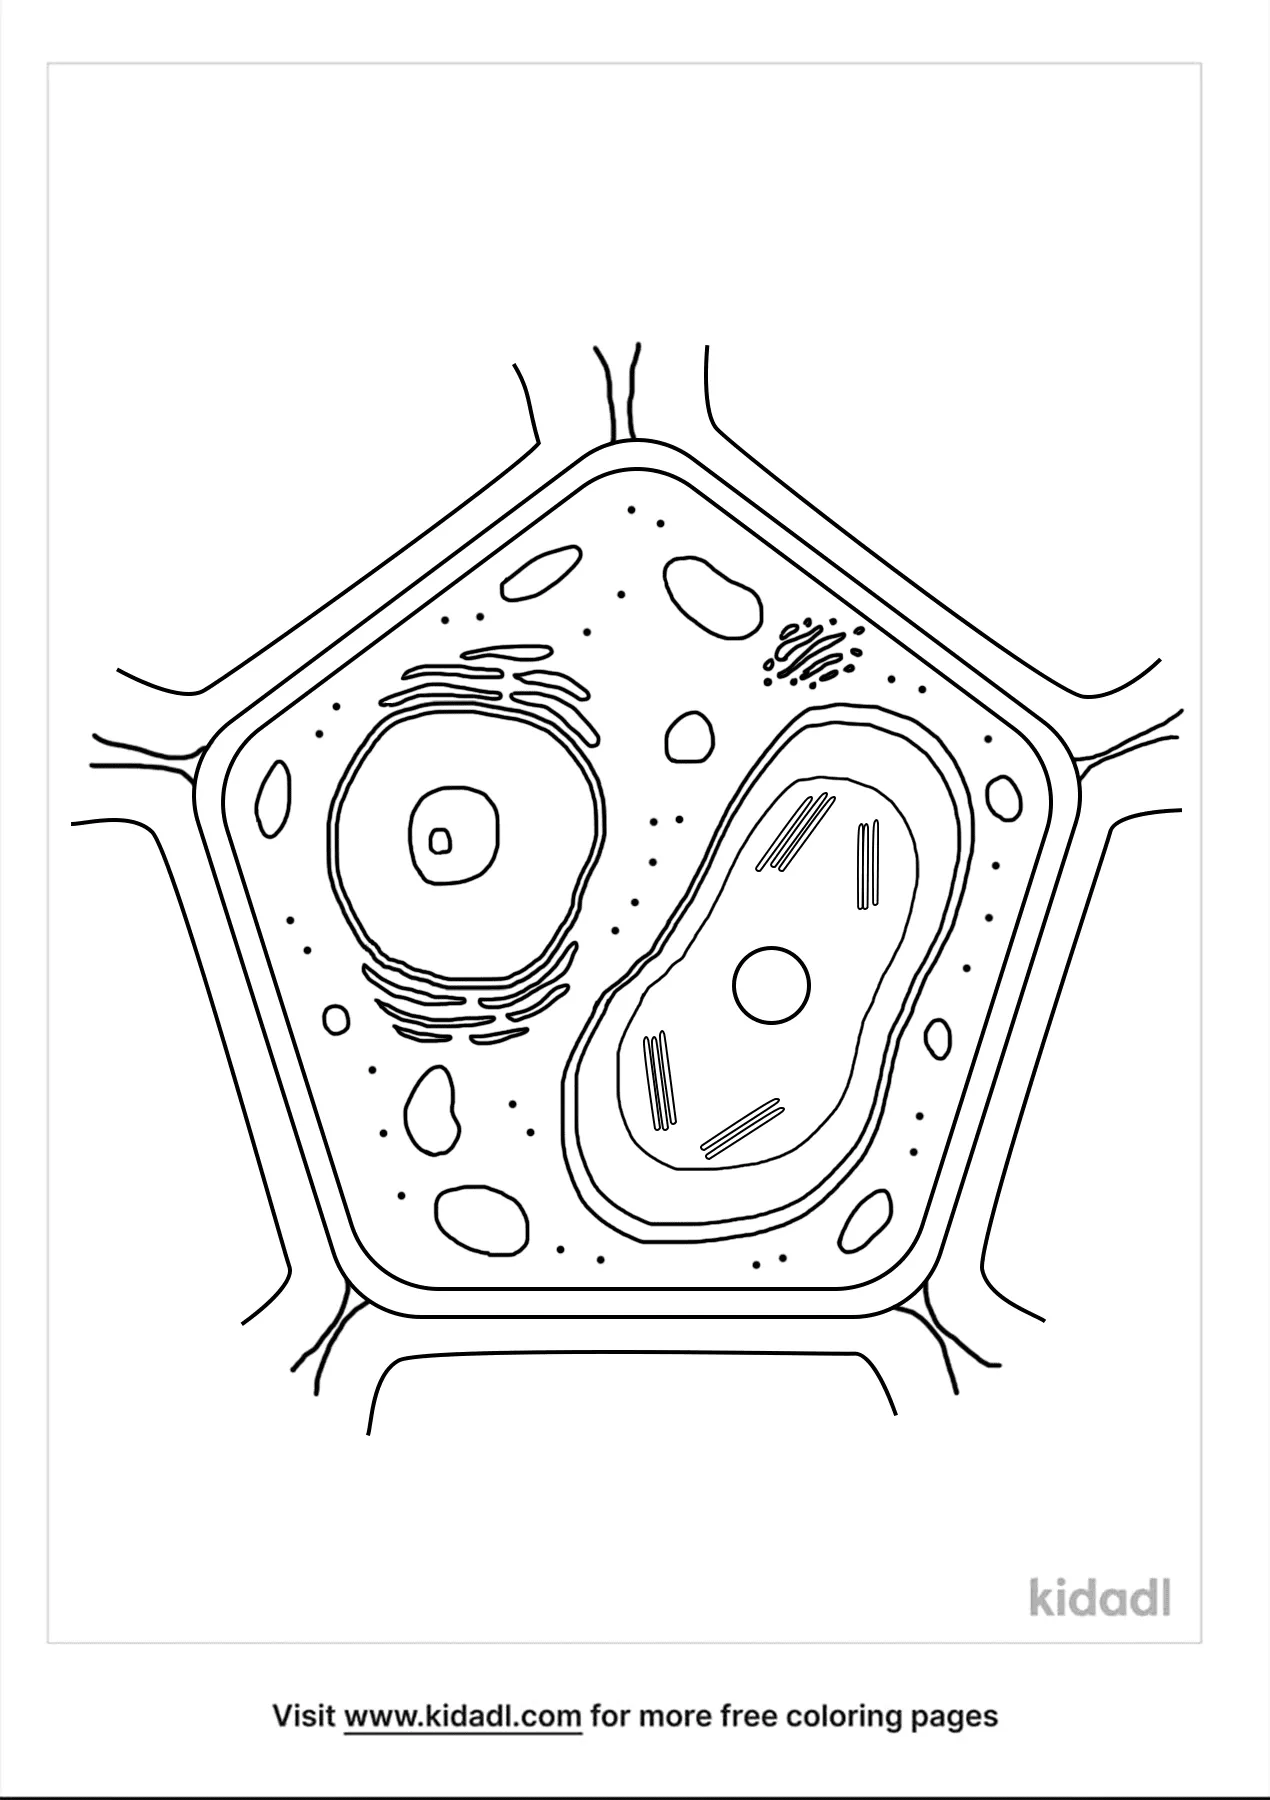 Plant Cell Coloring Worksheet